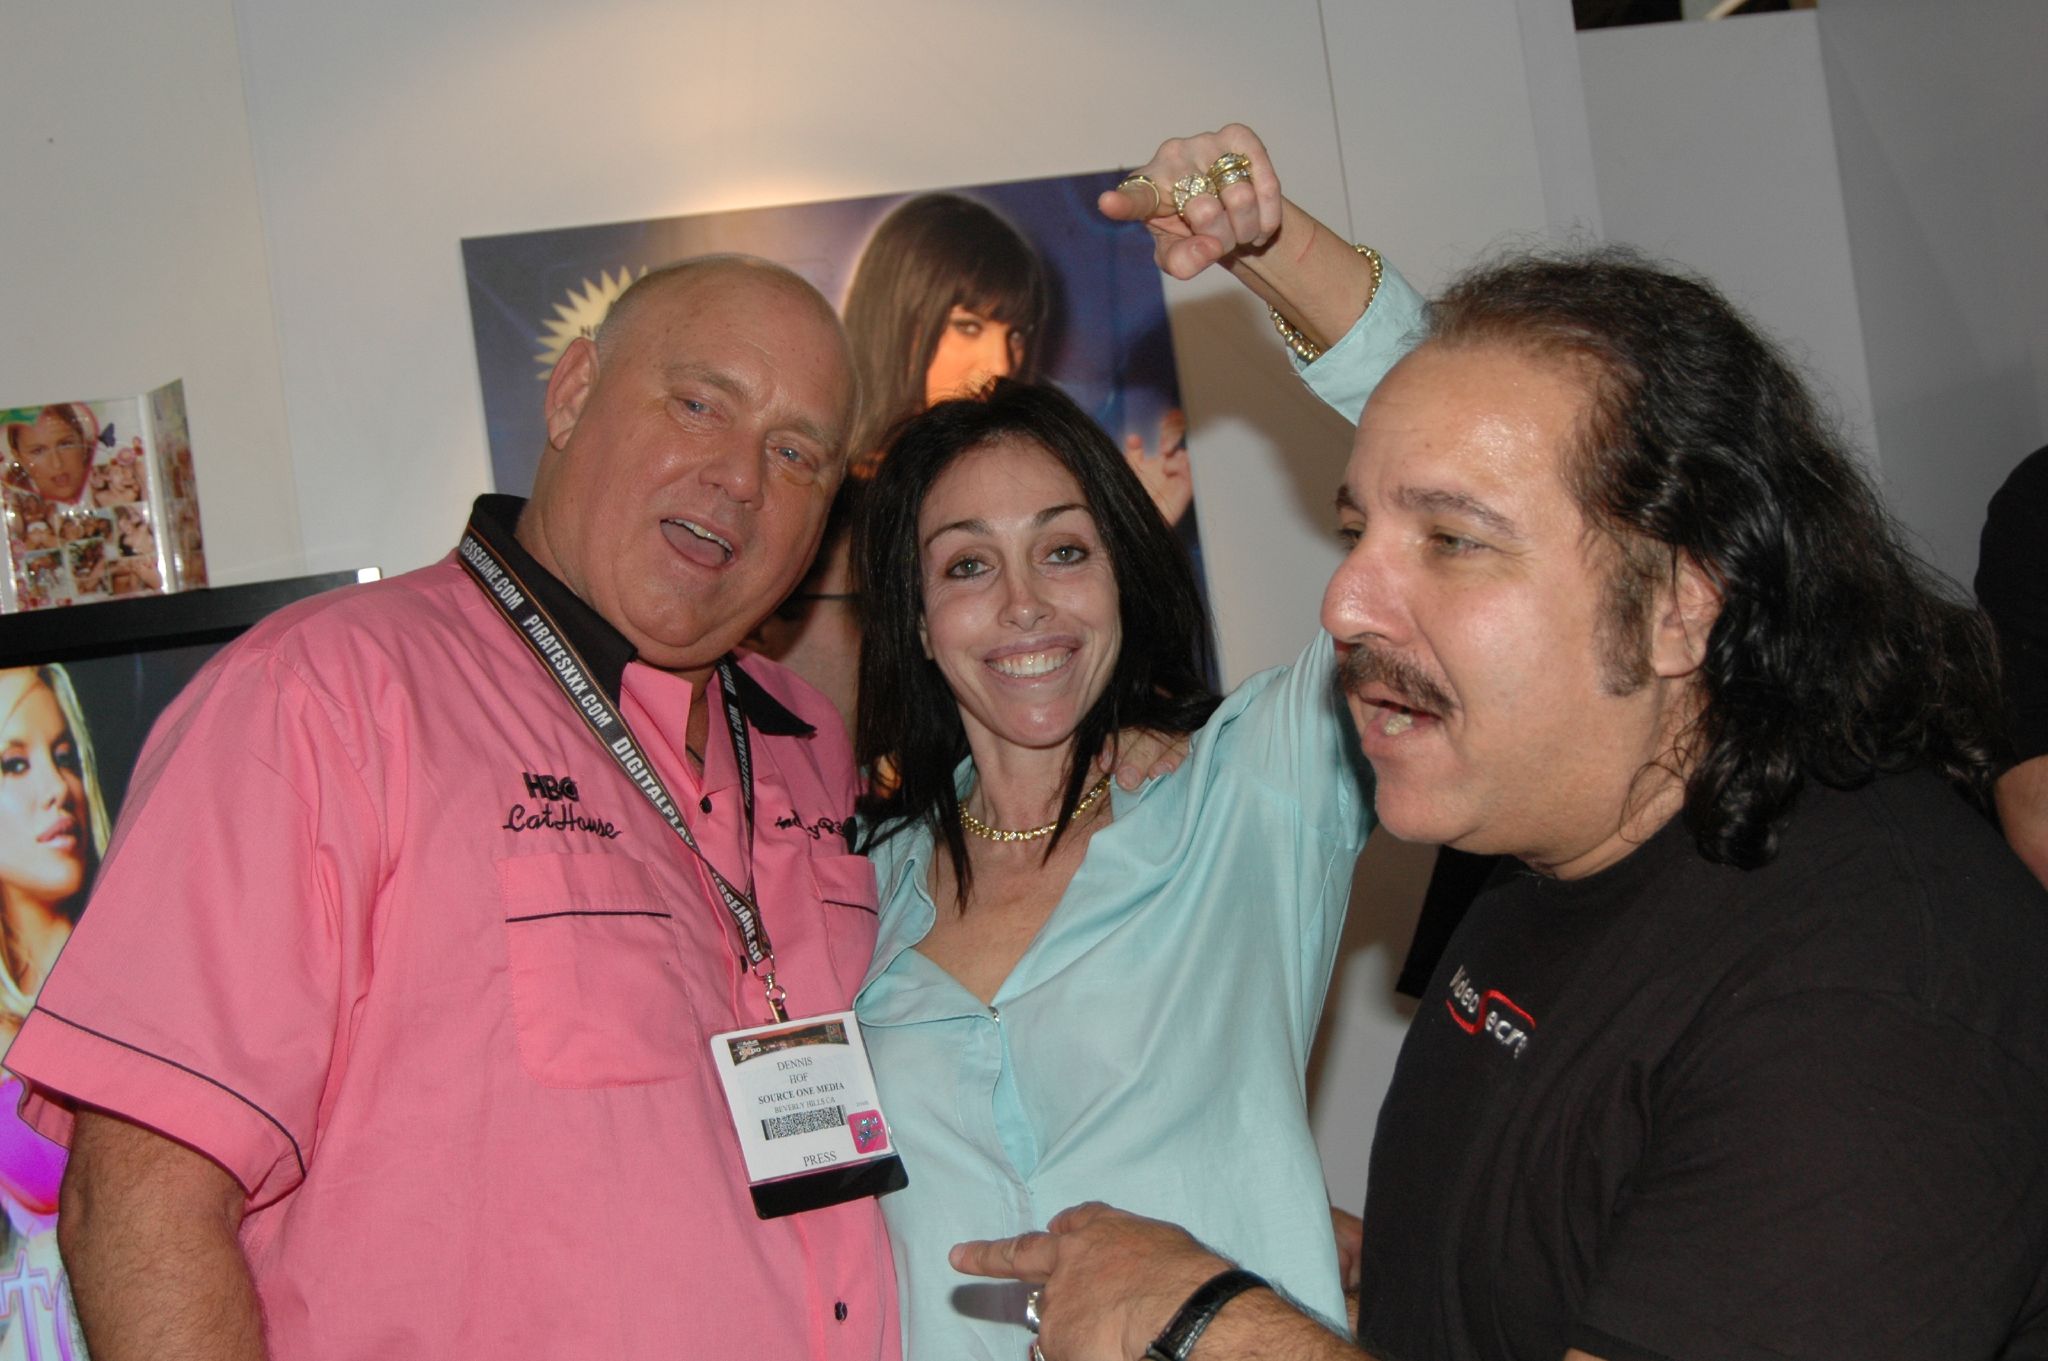 Best of Ron jeremy new videos